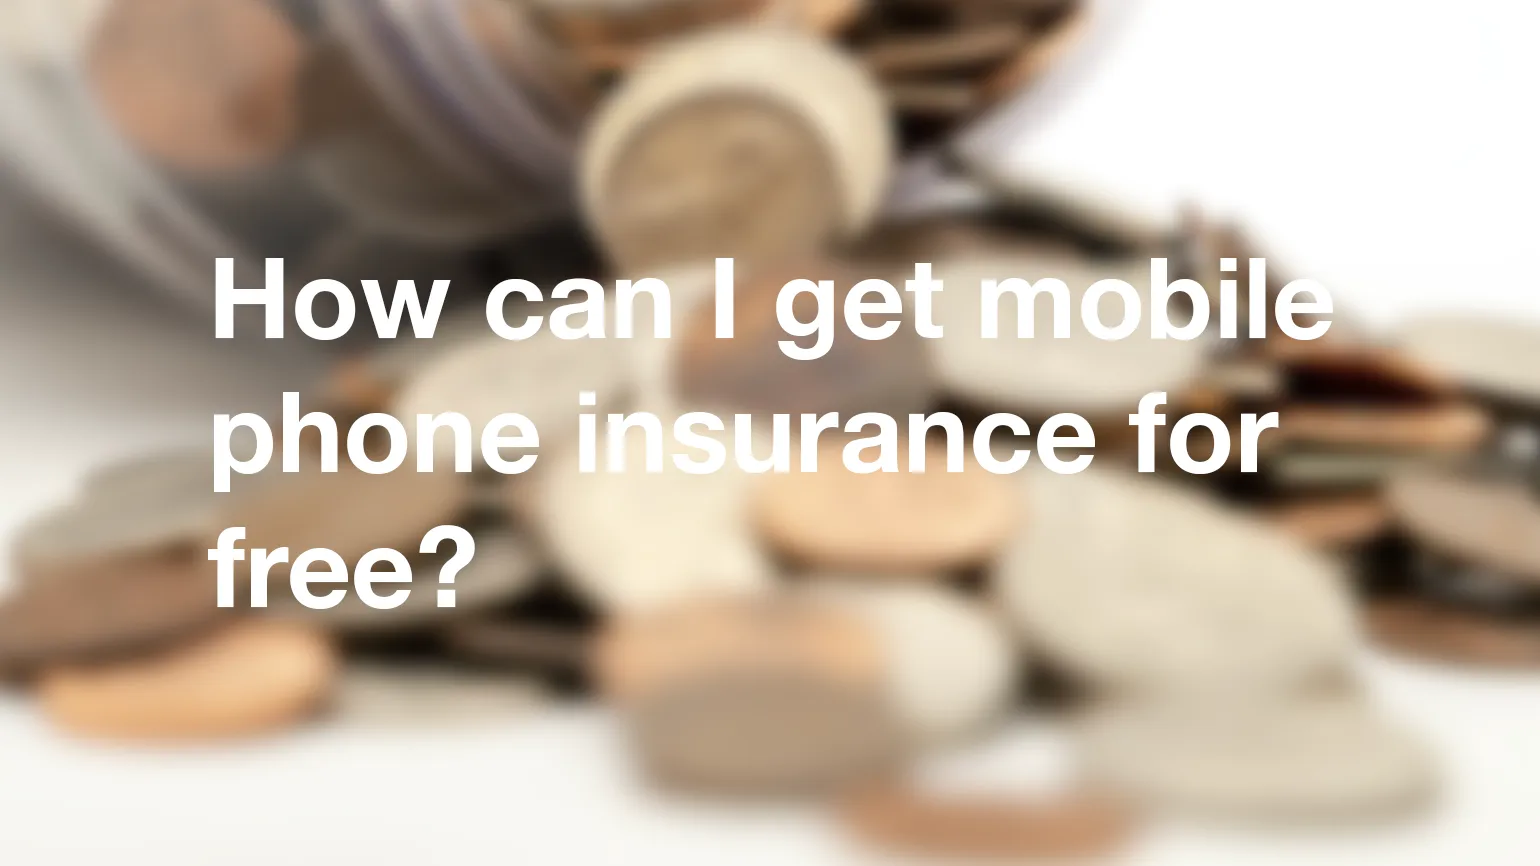 How can I get mobile phone insurance for free?